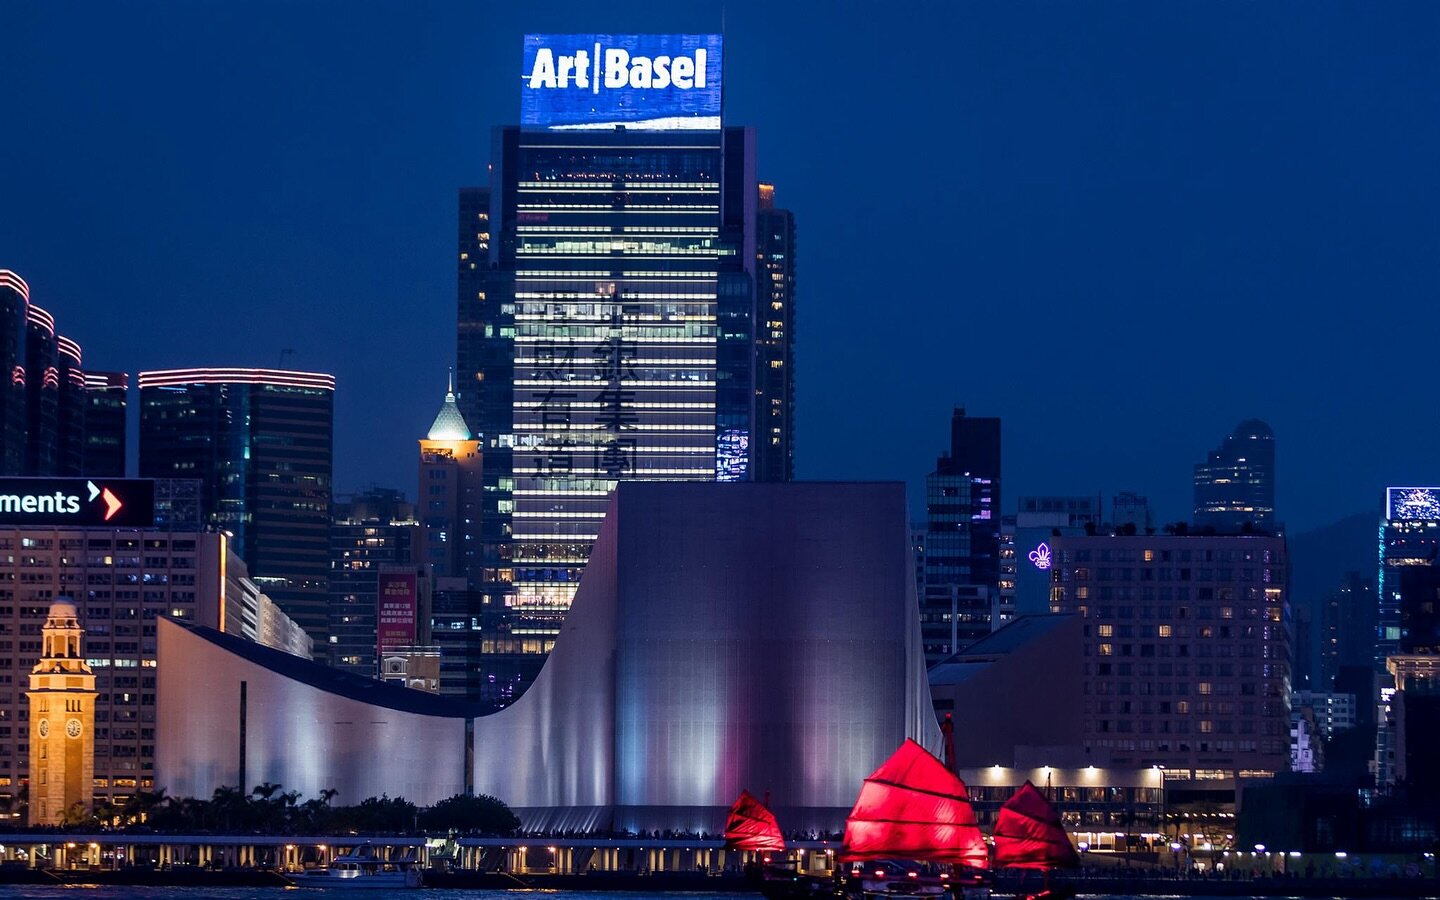 Hong Kong Art Month is here! These are our top recommendations&hellip; 

1. Hong Kong International Cultural Summit 
2. Art Basel Hong Kong @artbasel 
3. M+ Museum @mplusmuseum 

Plus dont miss out on the Victoria Dockside @victoriadockside and the H